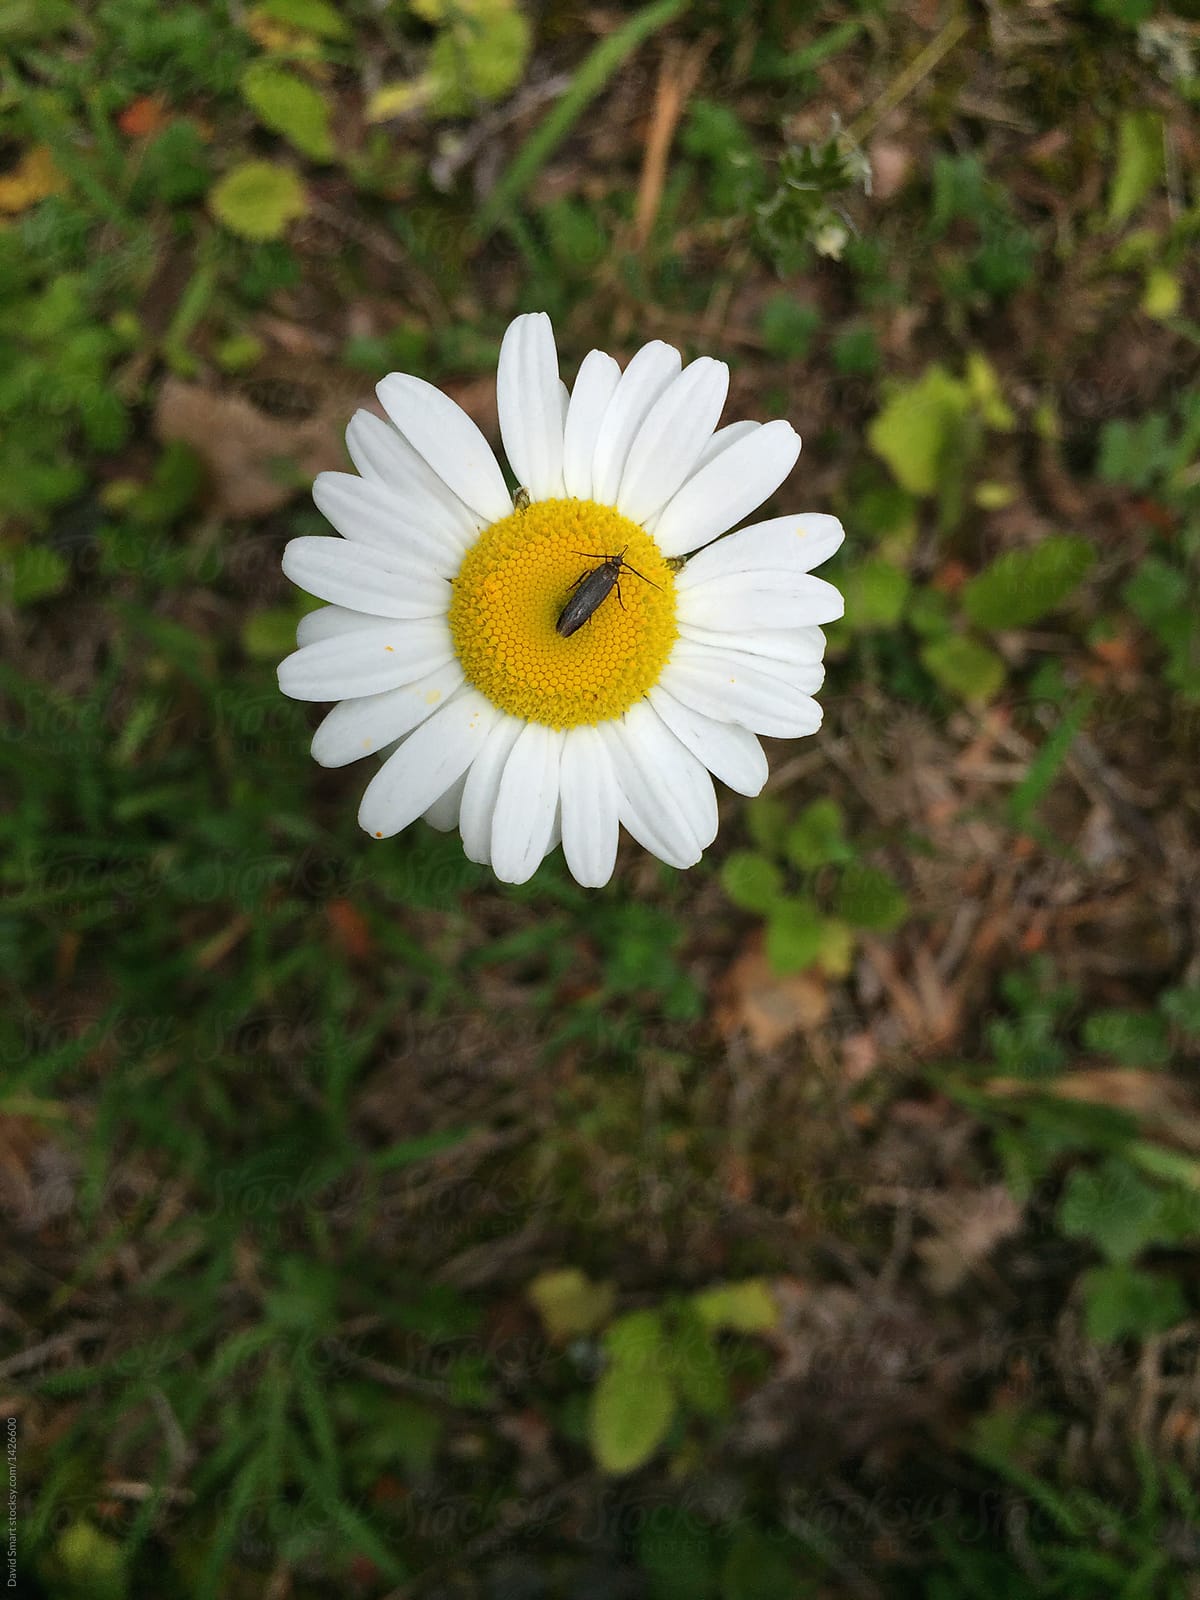 Insect on Daisy Flower from Above